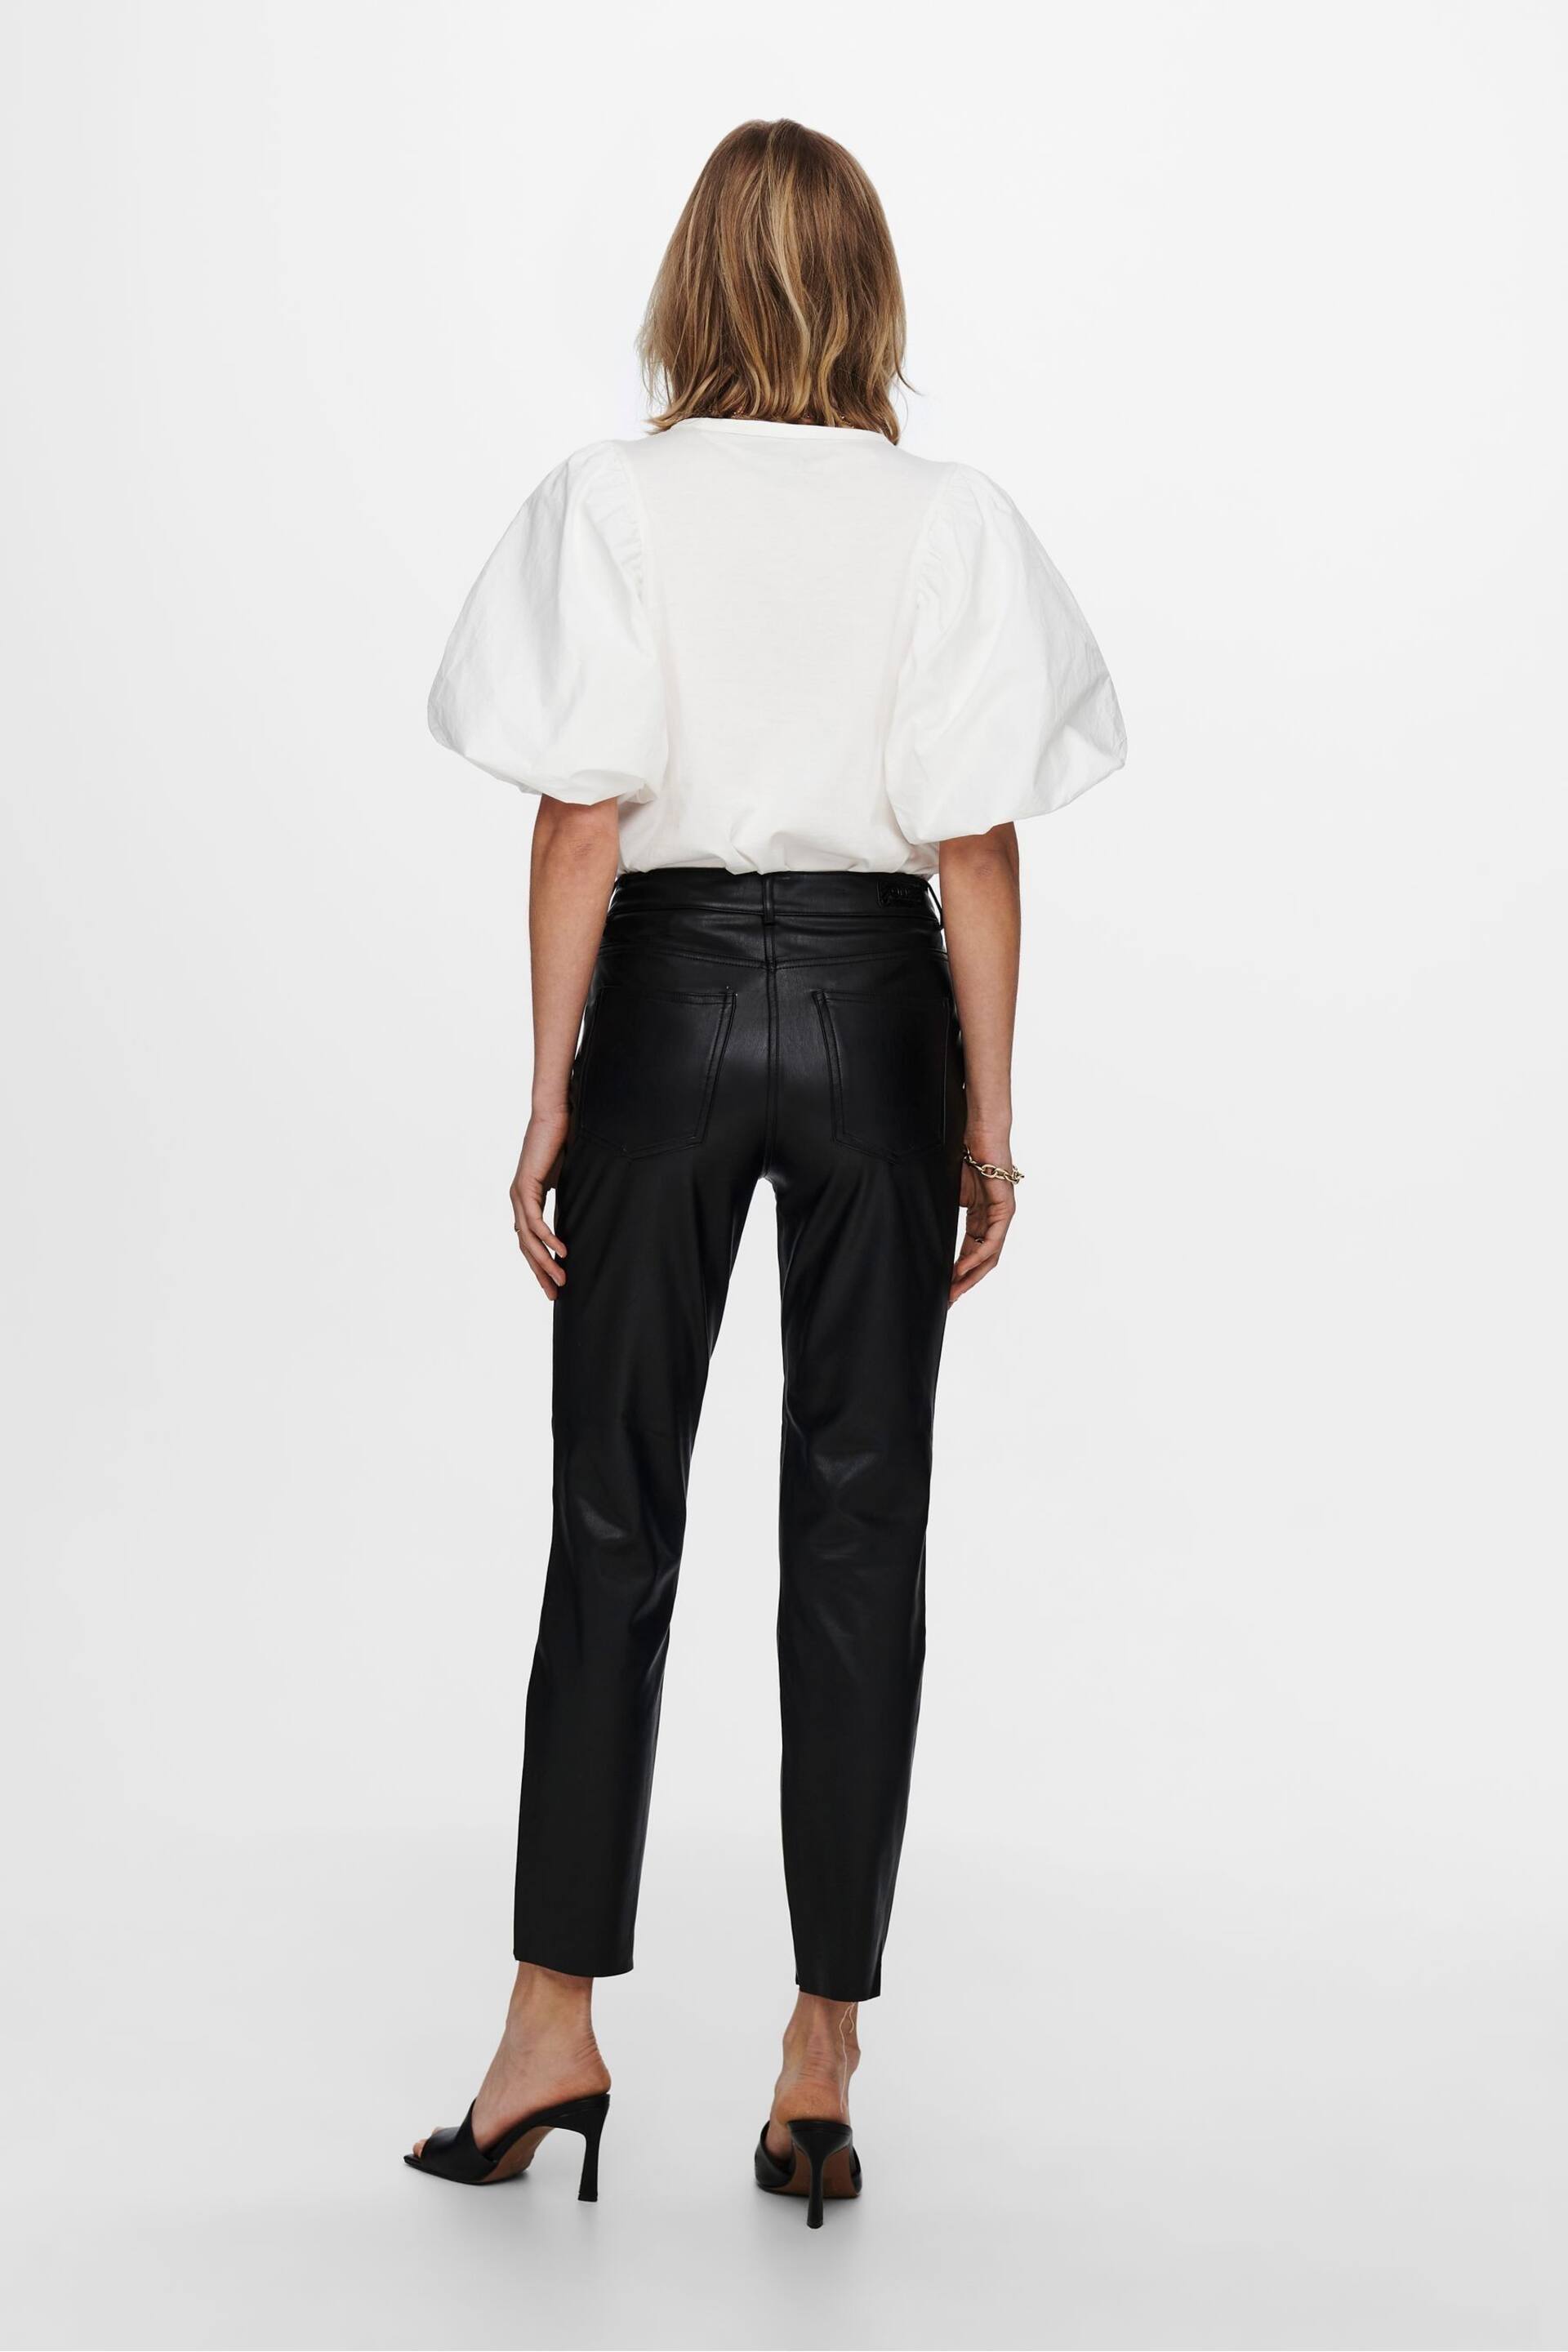 ONLY Black Petite High Waisted Faux Leather Workwear Trousers - Image 2 of 5